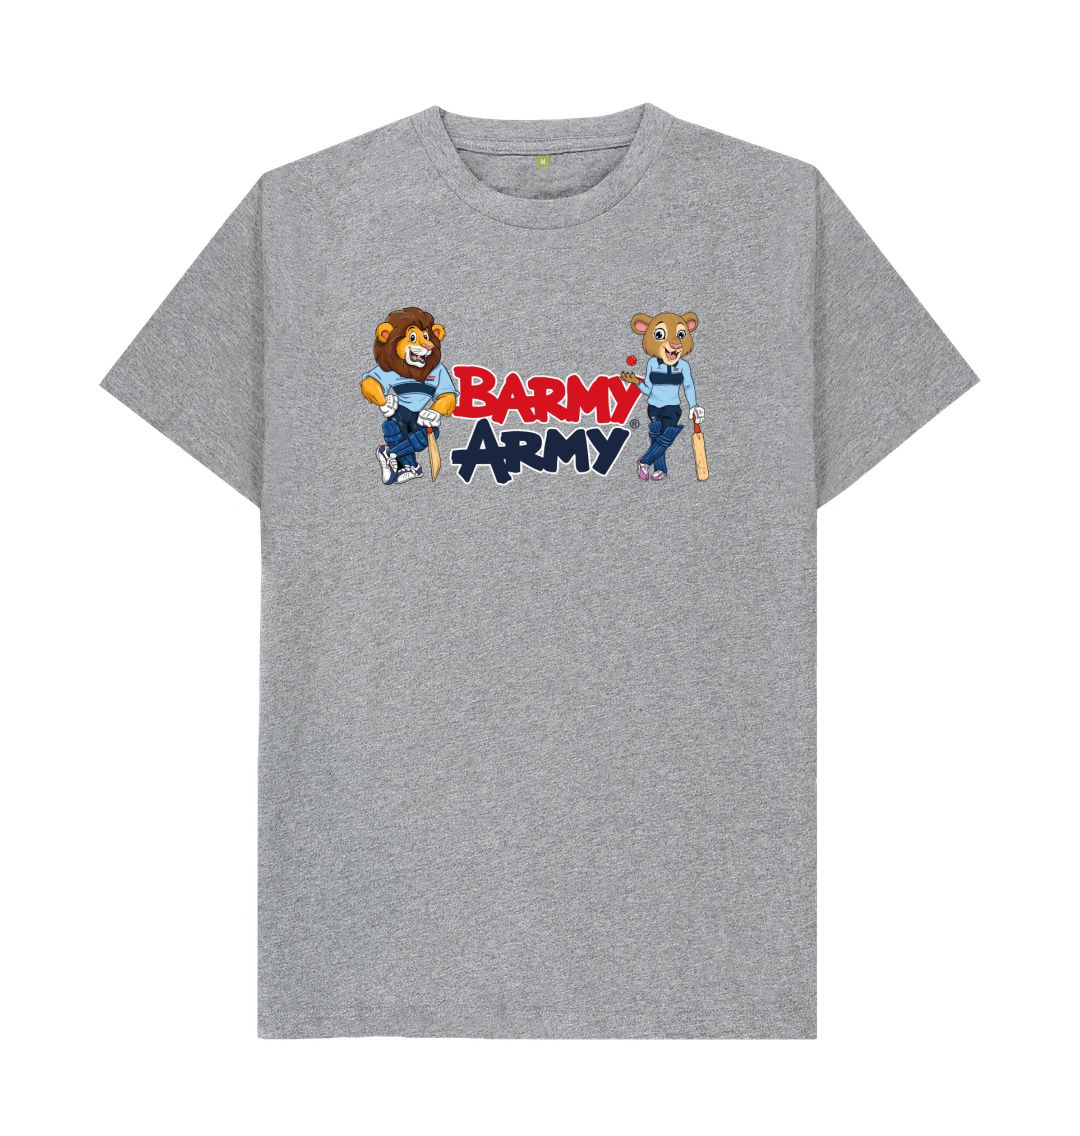 Athletic Grey Barmy Army Mascots Tee - Men's